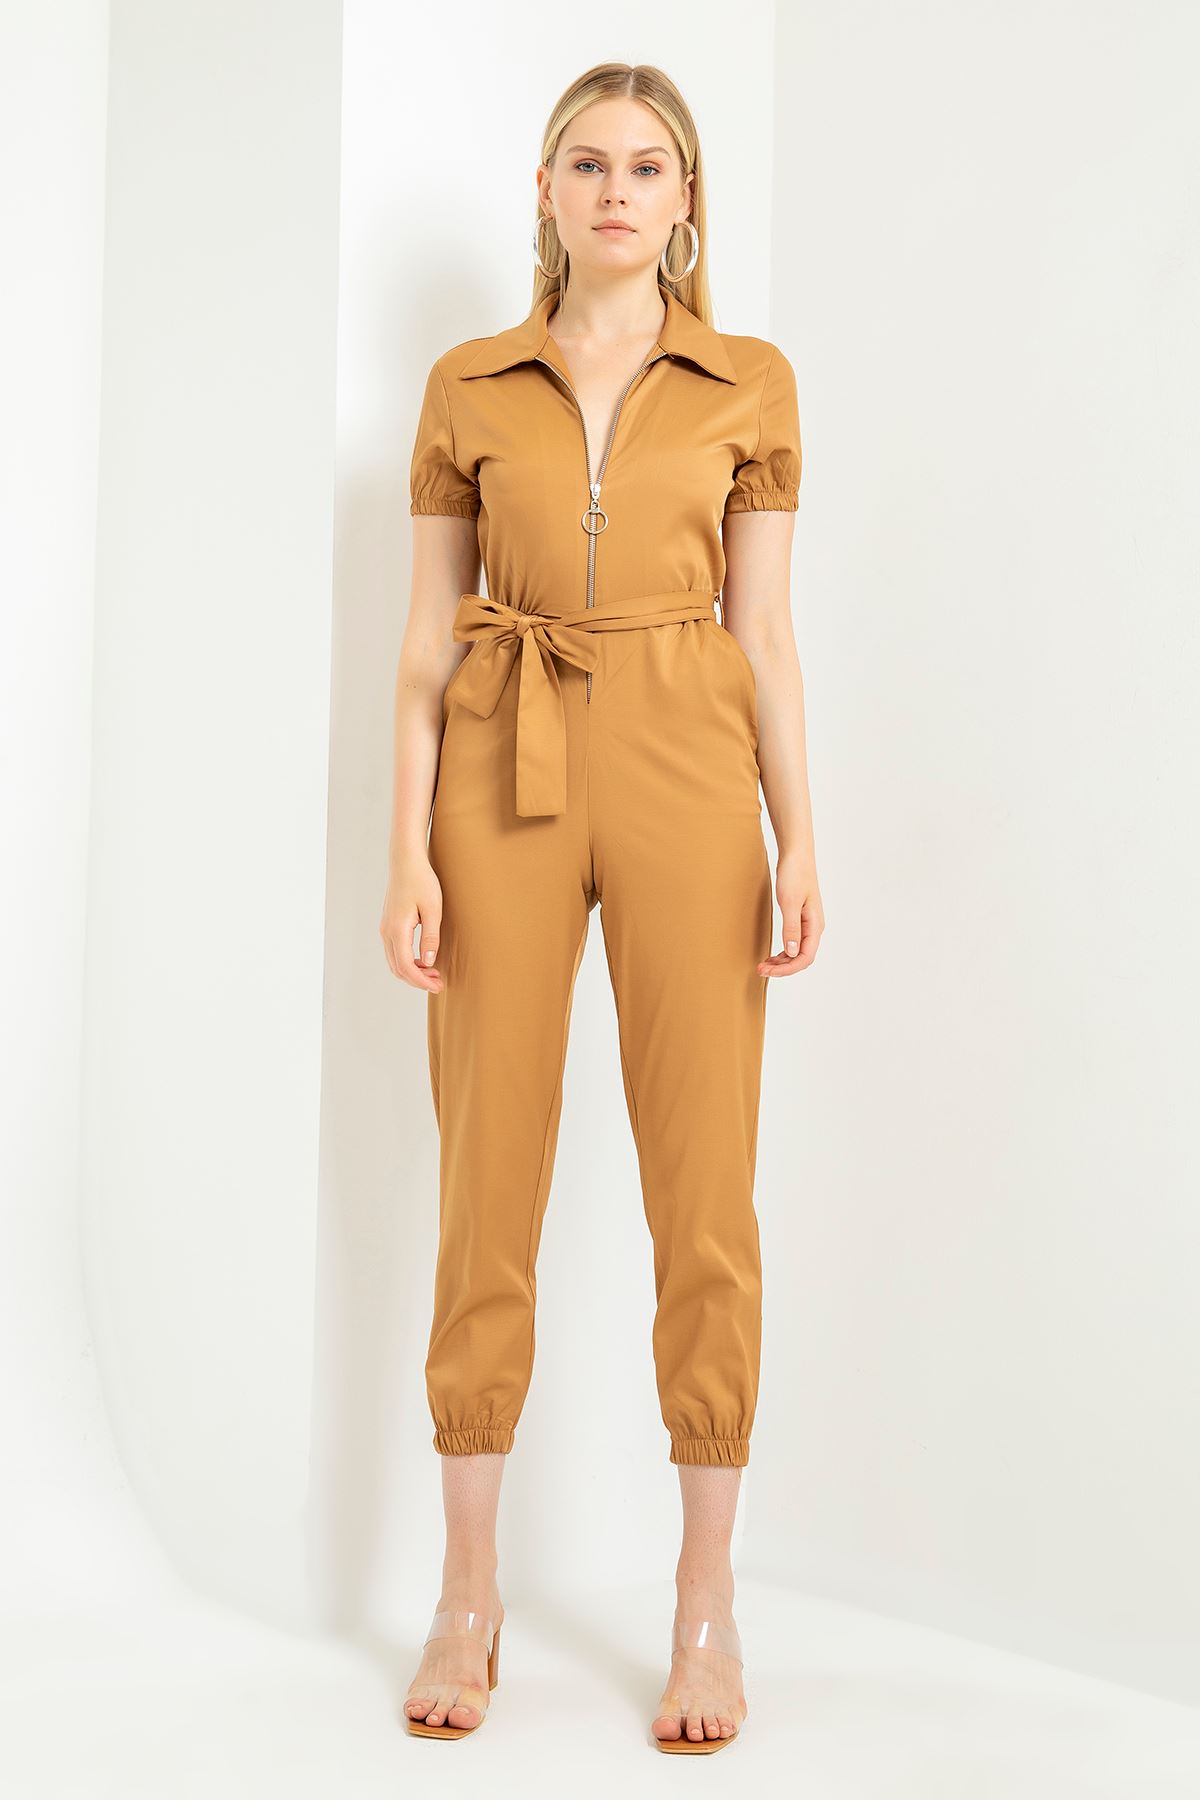 Erika Fabric Short Sleeve Ankle Length Zip Belted Women Overalls - Light Brown